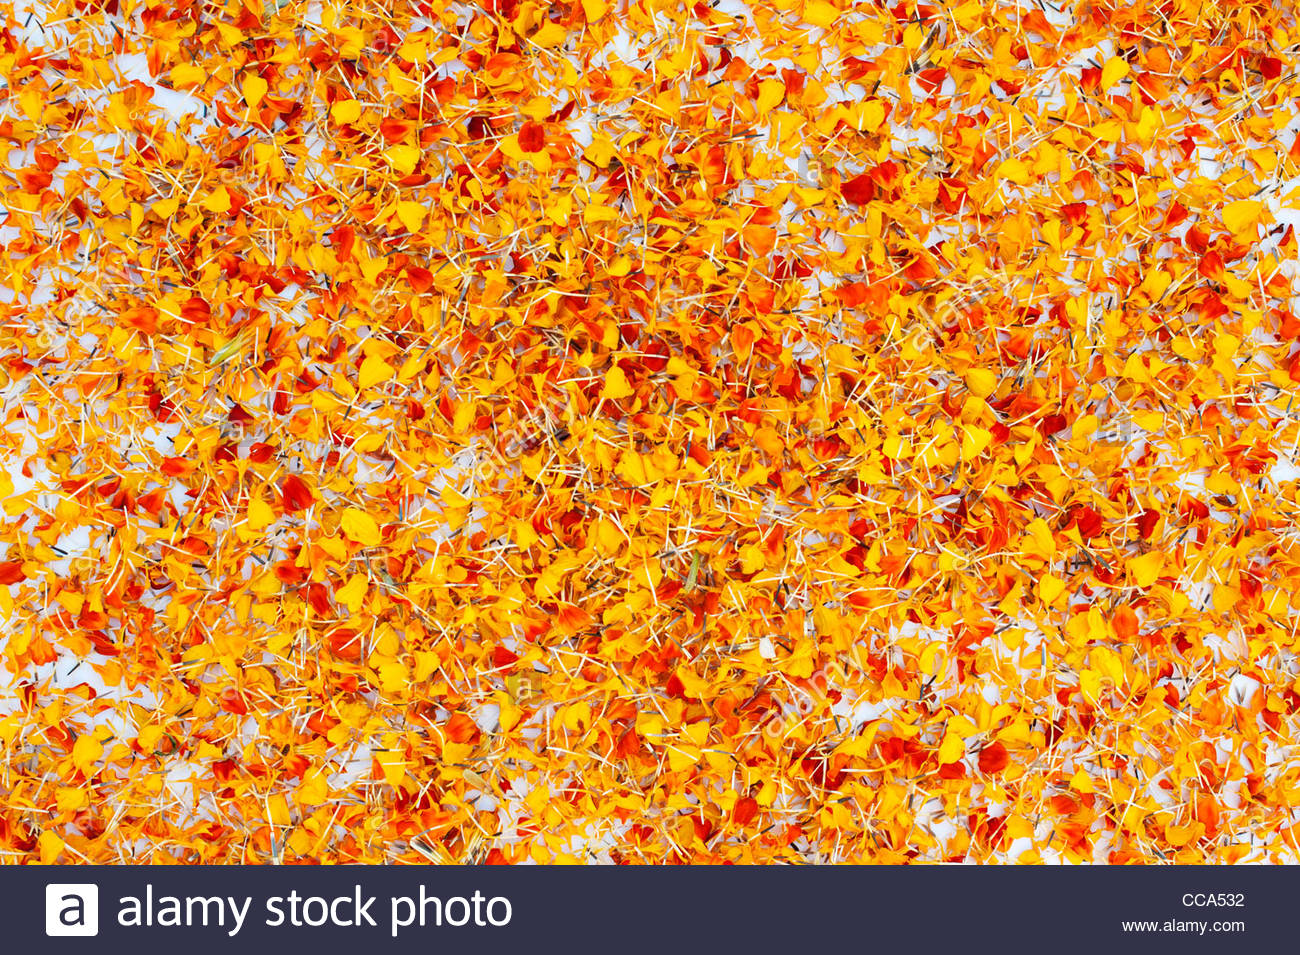 Marigold Flower Petals On A White Background Stock Photo